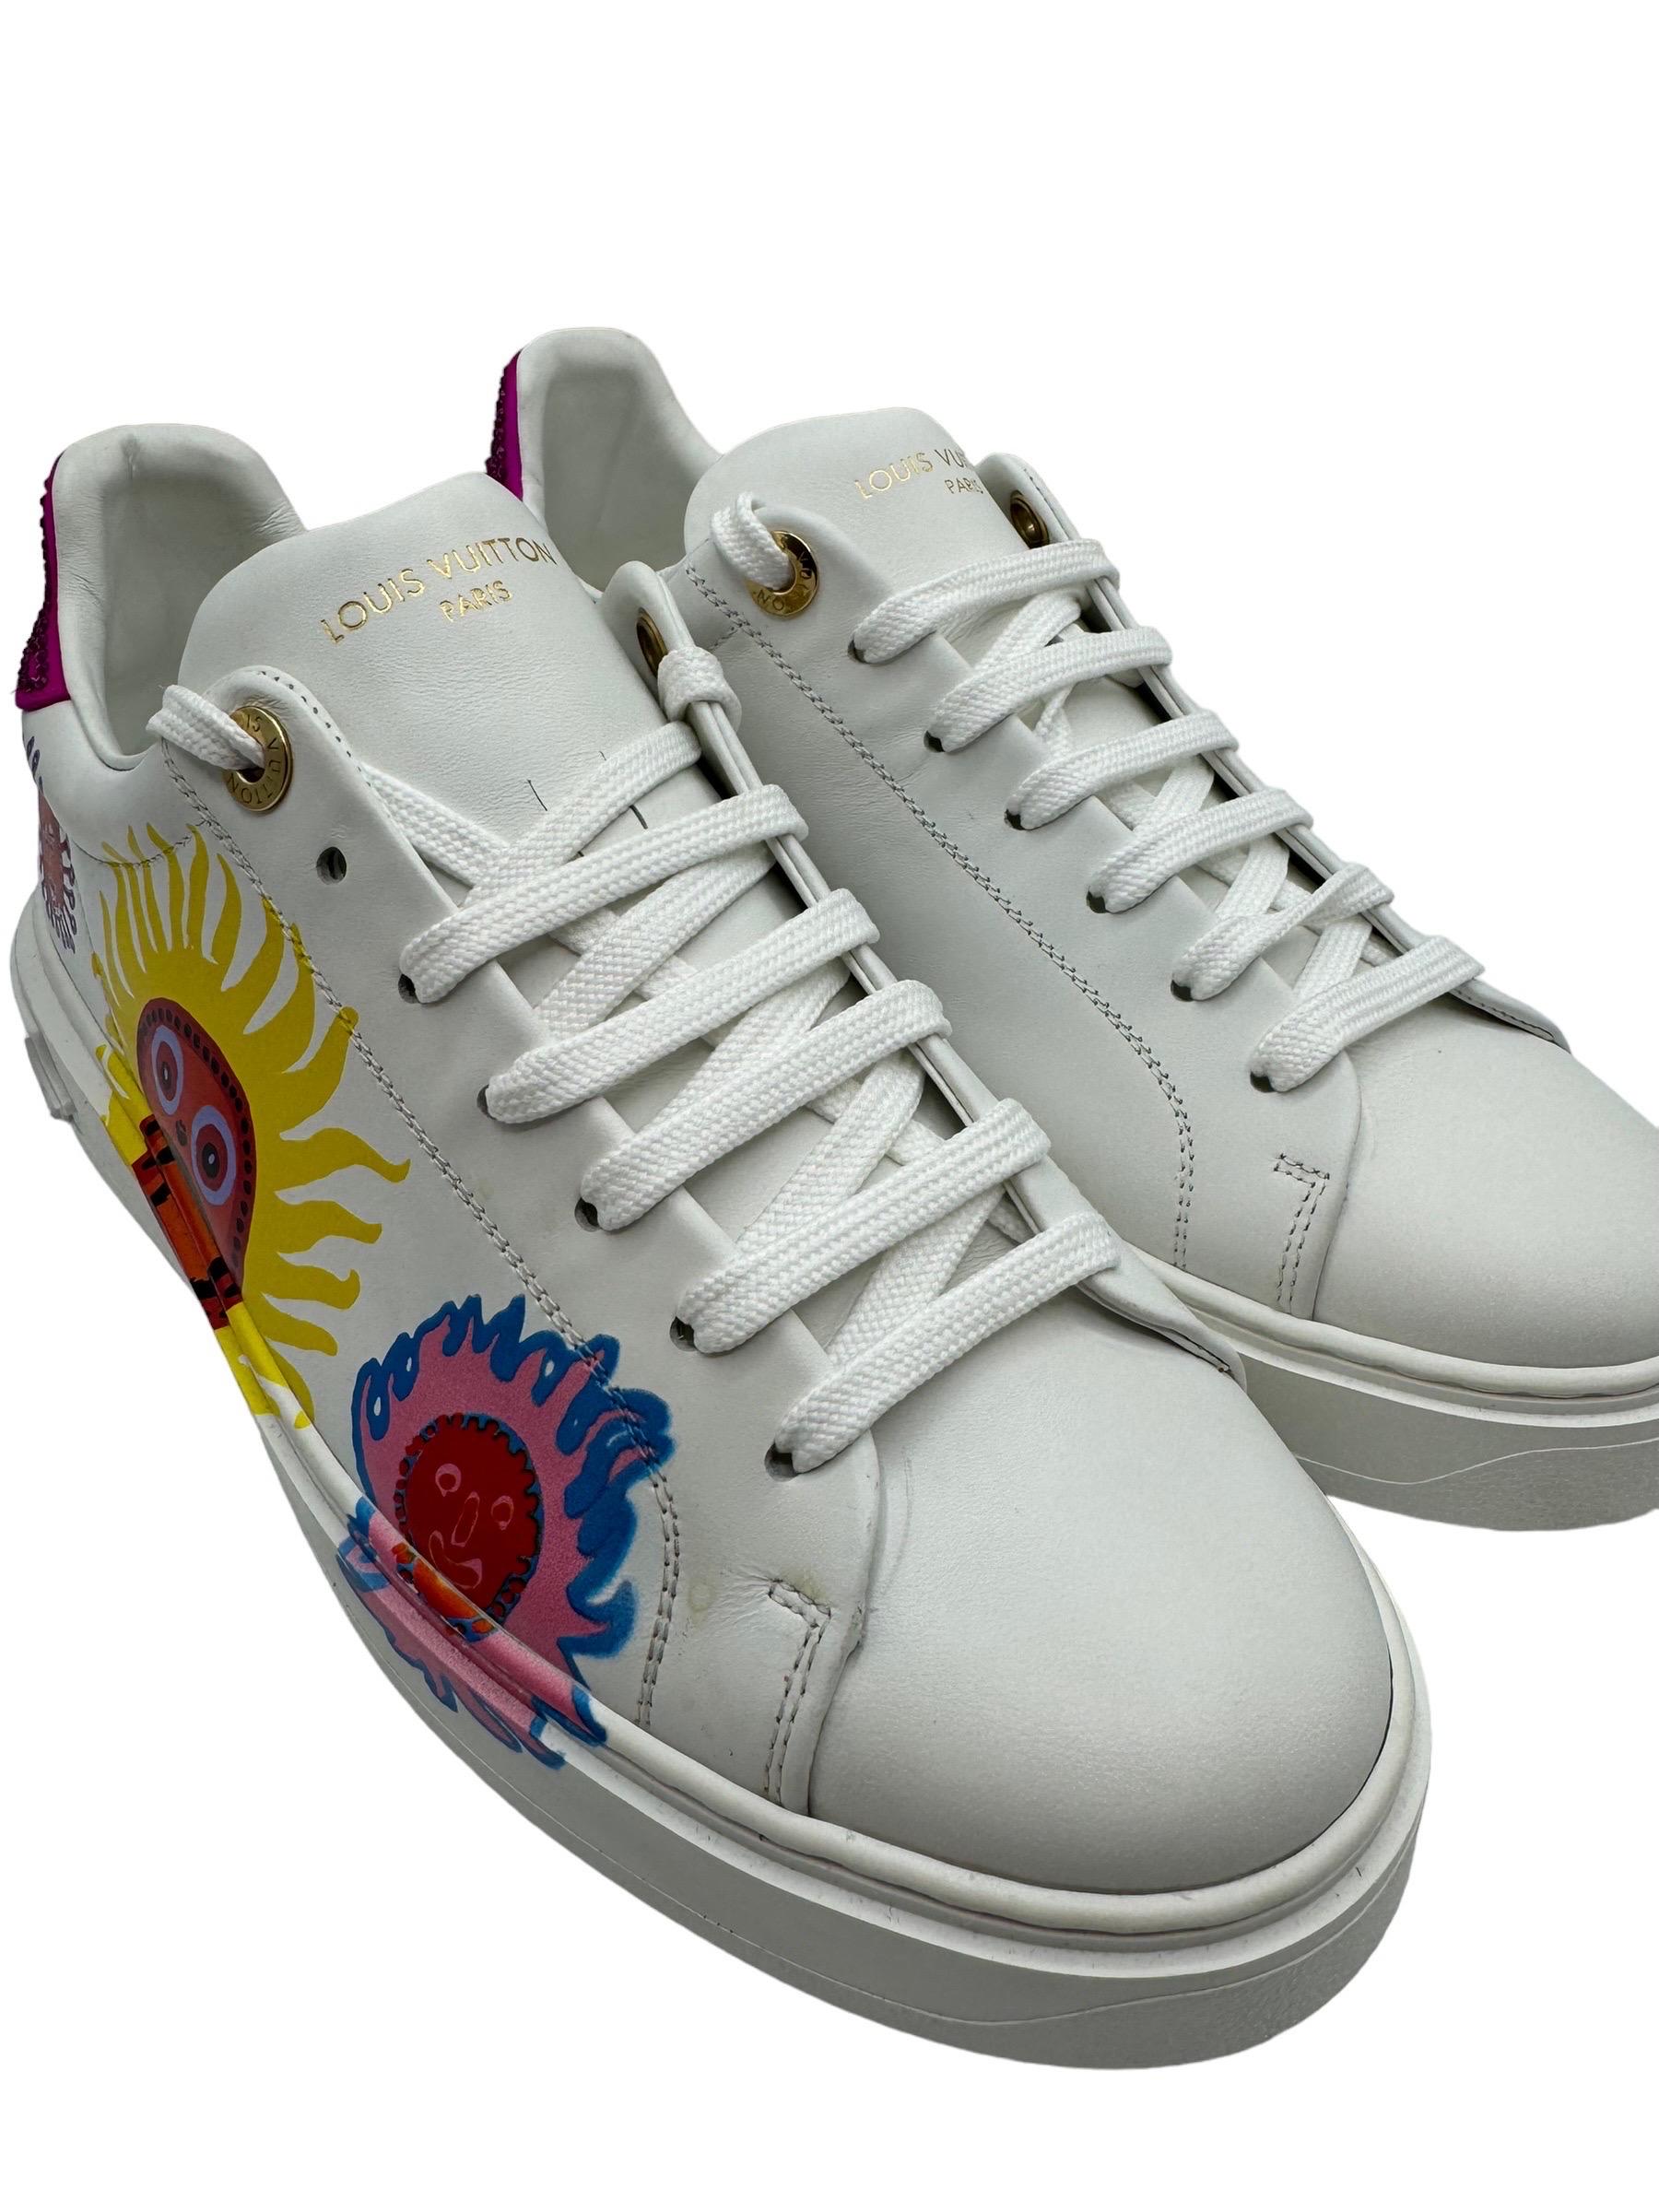 Women's Sneakers Louis Vuitton X Yayoi Kusama Time Out For Sale